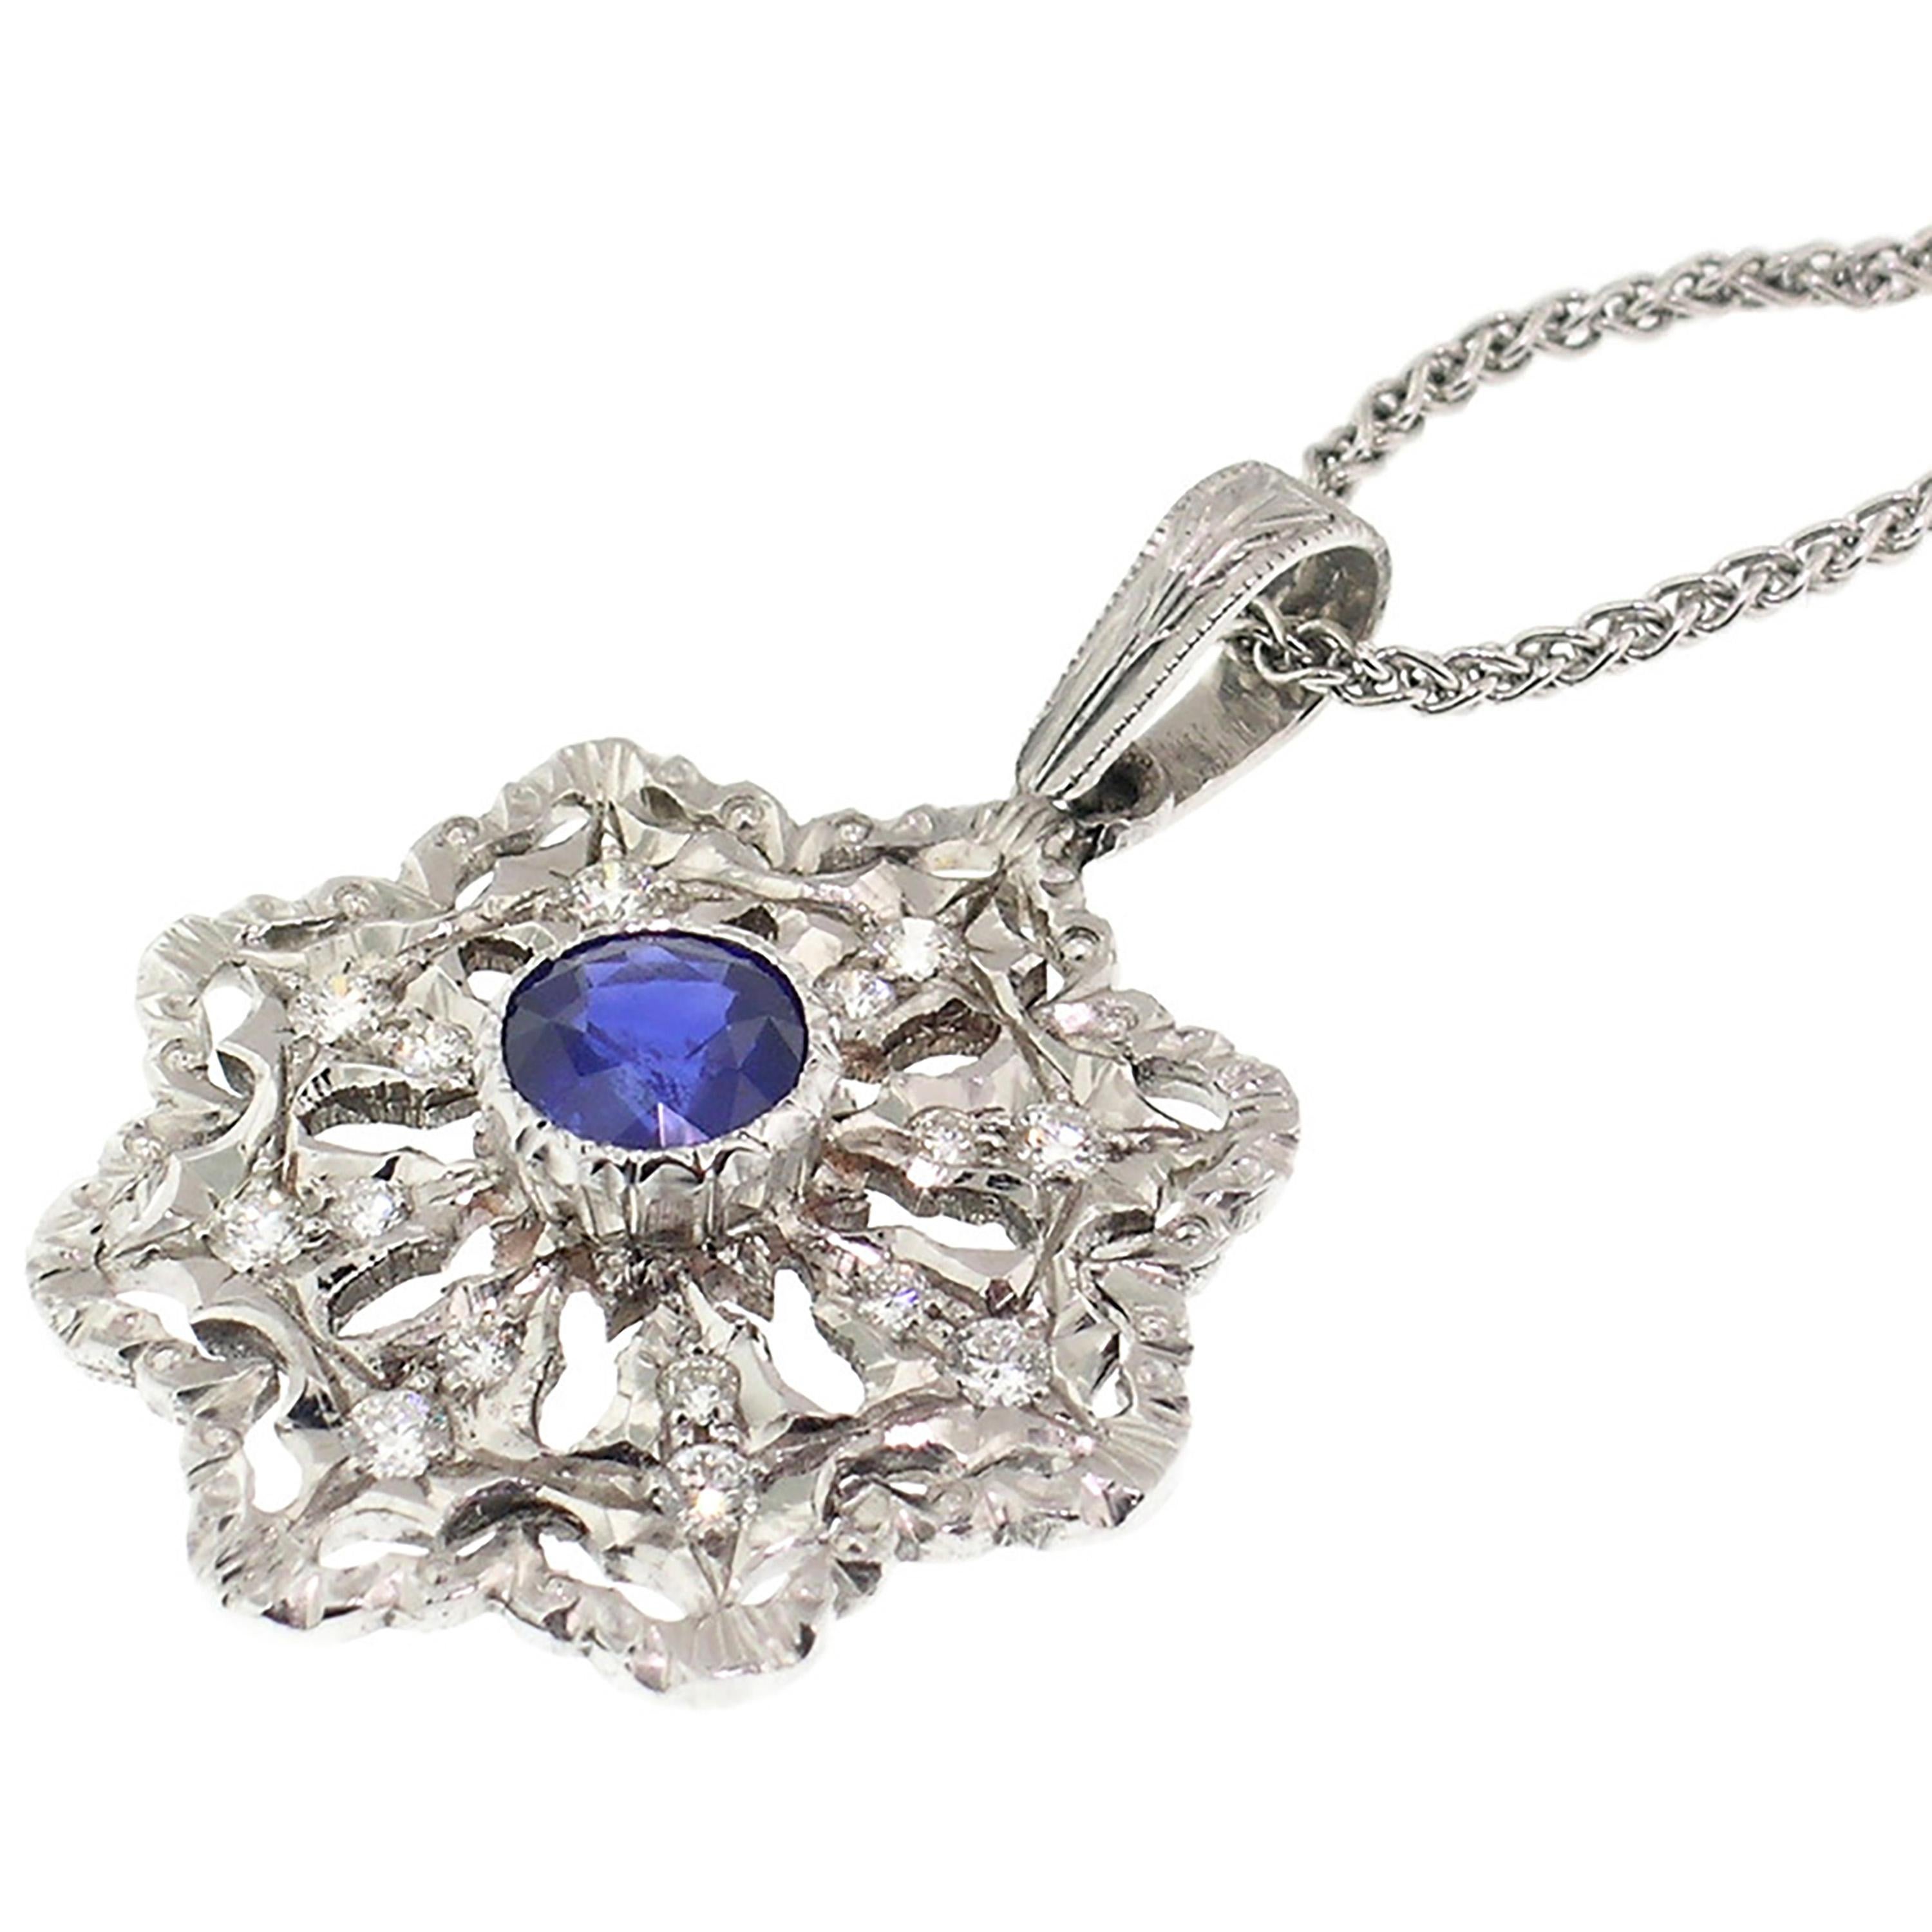 Few things are more classic than a brilliant blue sapphire with diamonds in white gold. This sapphire features a perfect blue color and has been cut to maximize its lively and bright look. 

The lovely blue sapphire is centered in an elegant, lacy